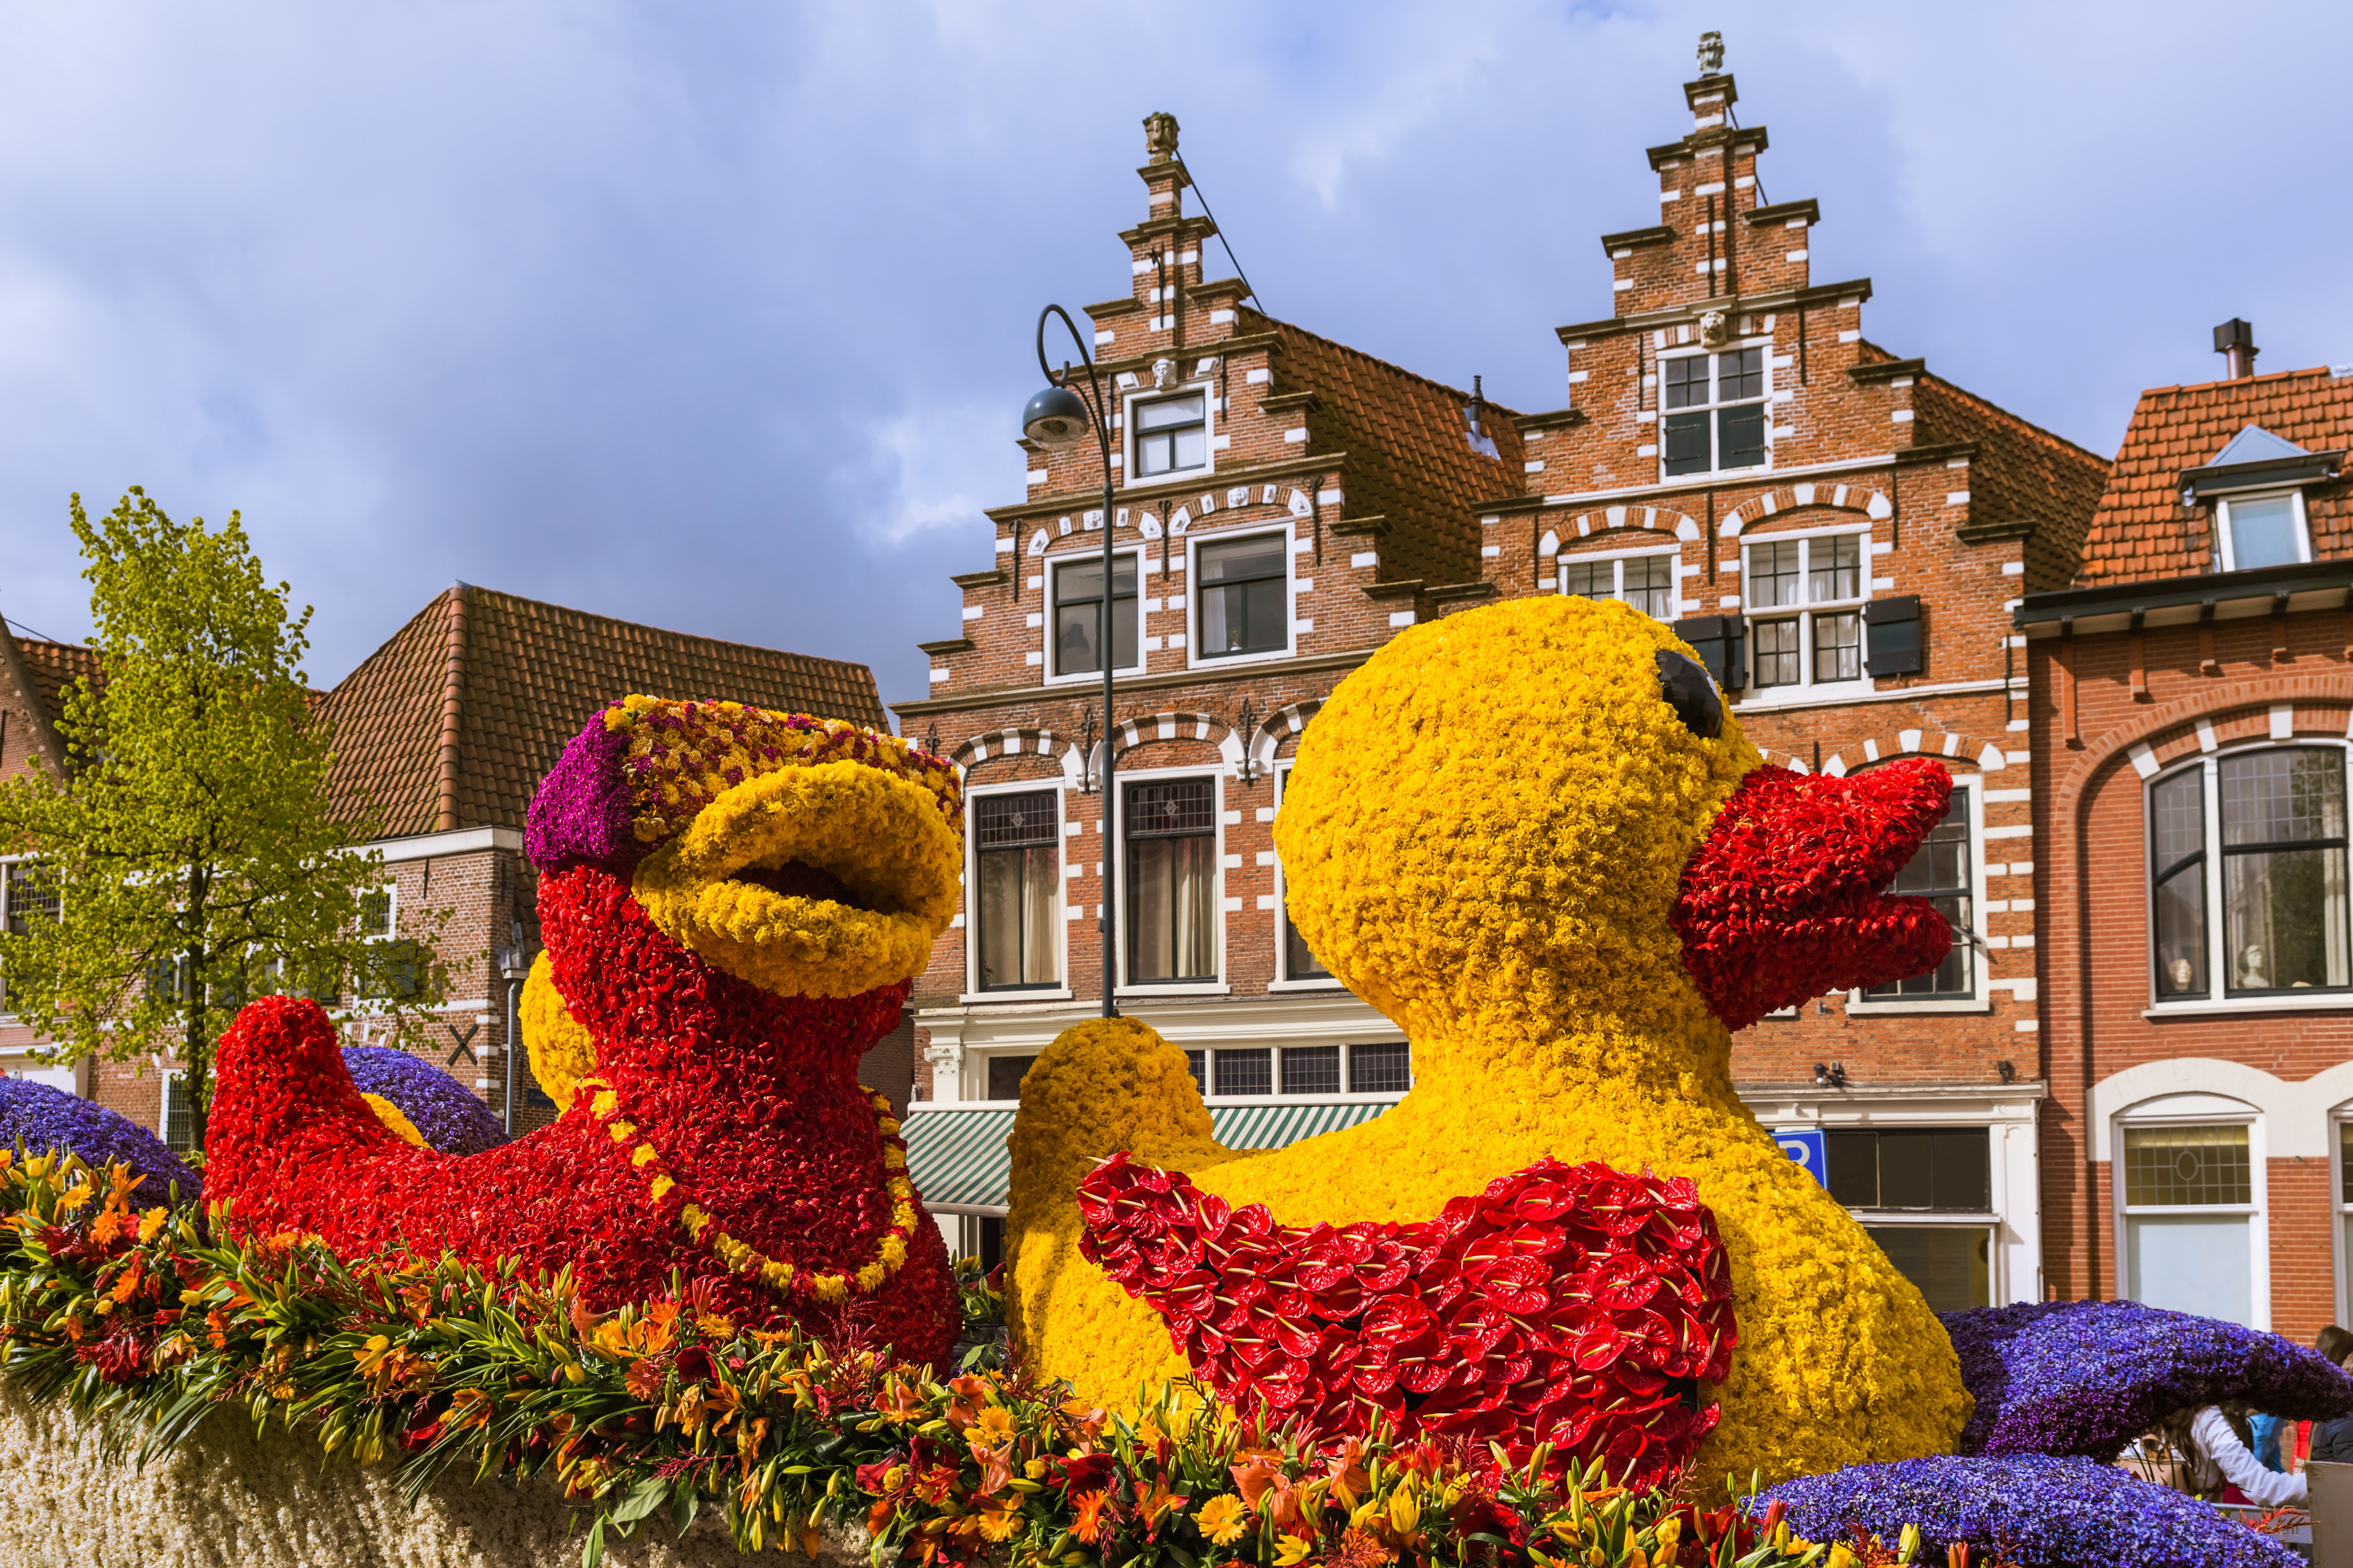 Admire the epic and colourful creations at the Flower Parade